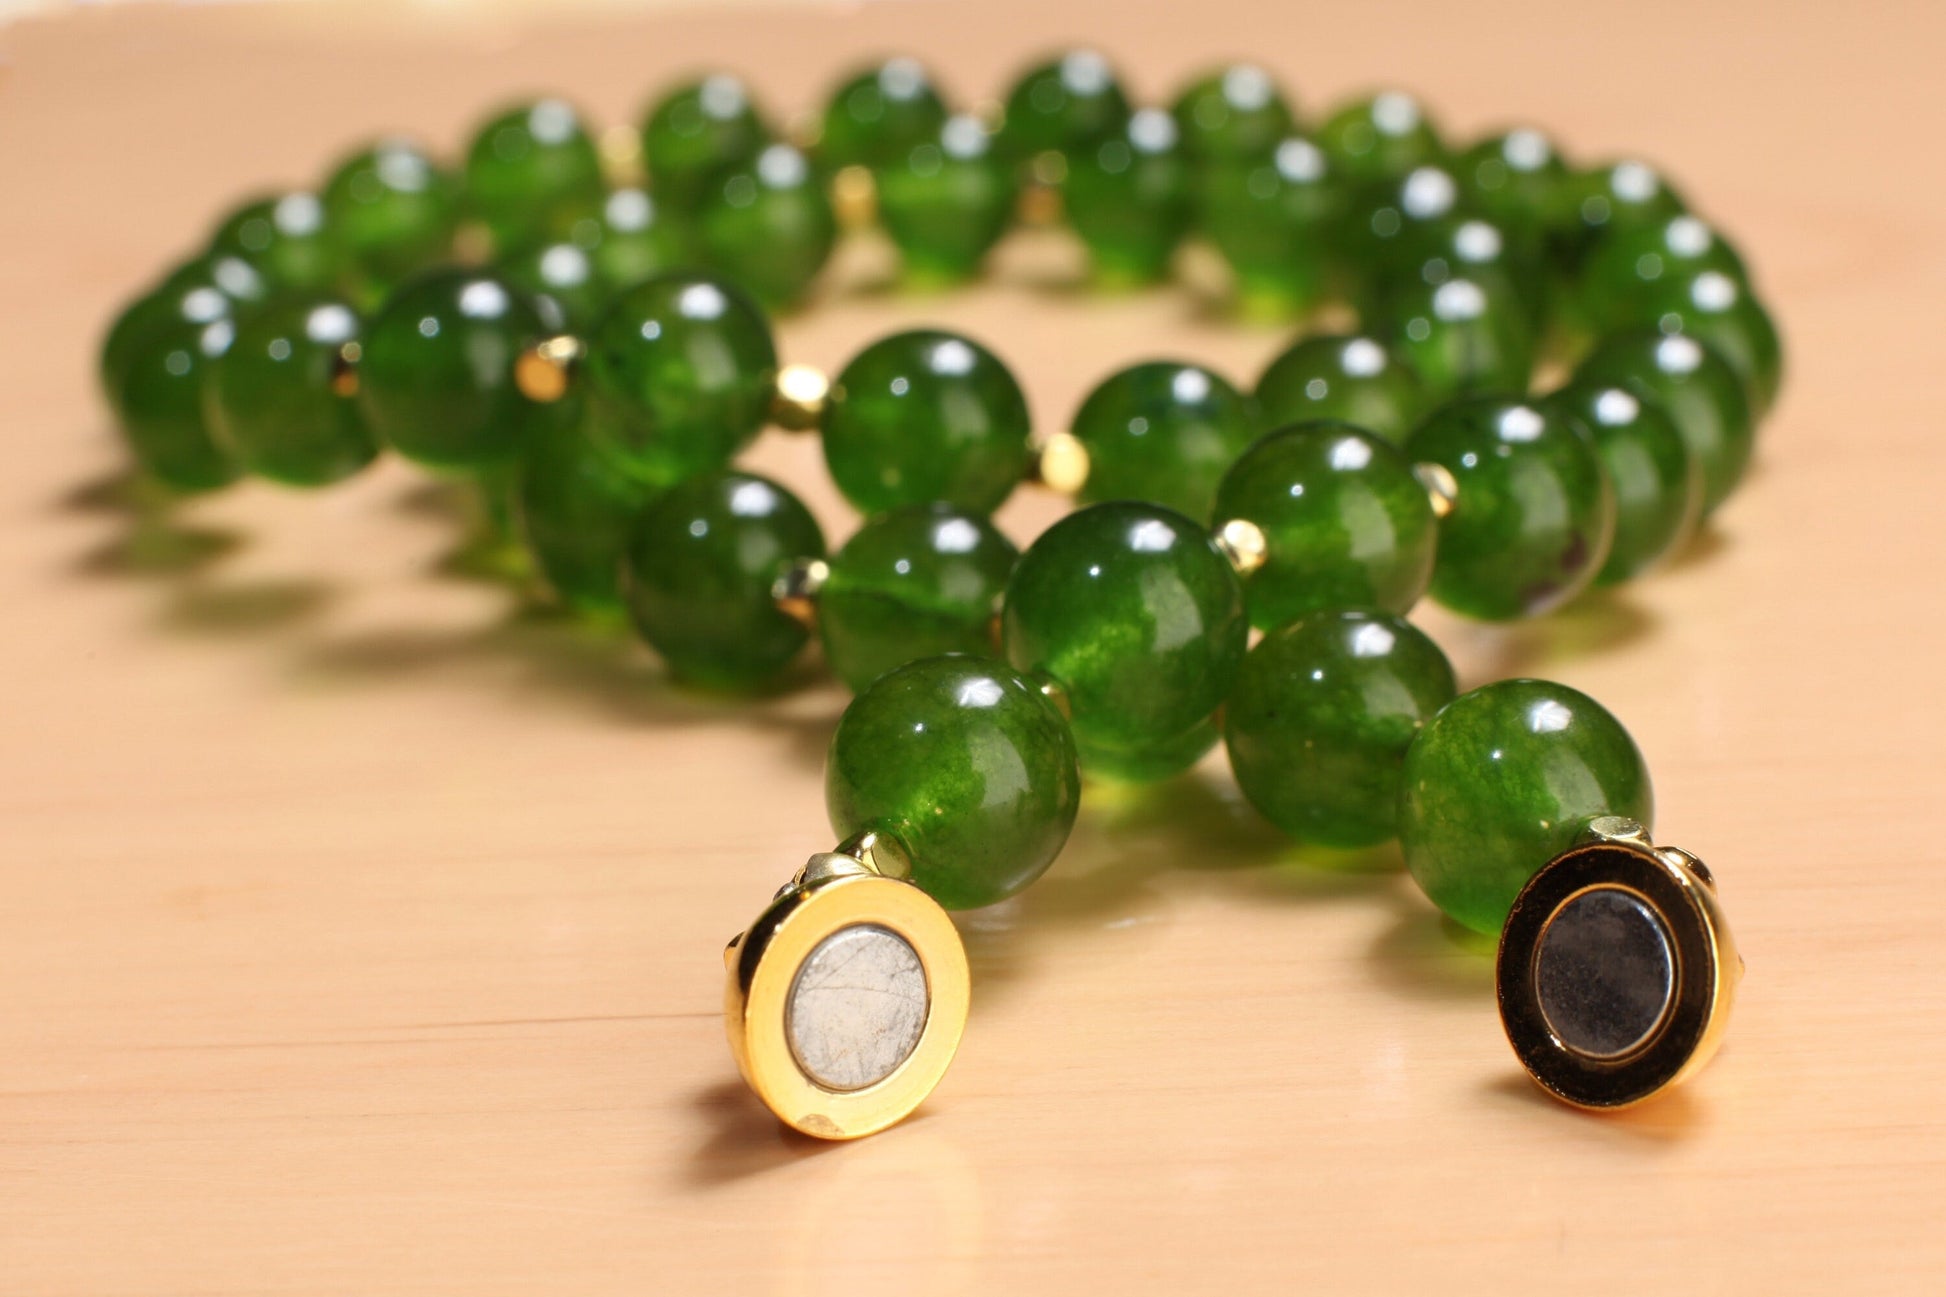 Genuine Green Jade, Nephrite Canada Jade 10mm Round Gold, Gold Filled Necklace, Strong Magnetic Clasp. High Quality Jade 16&quot;- 34&quot; Necklace